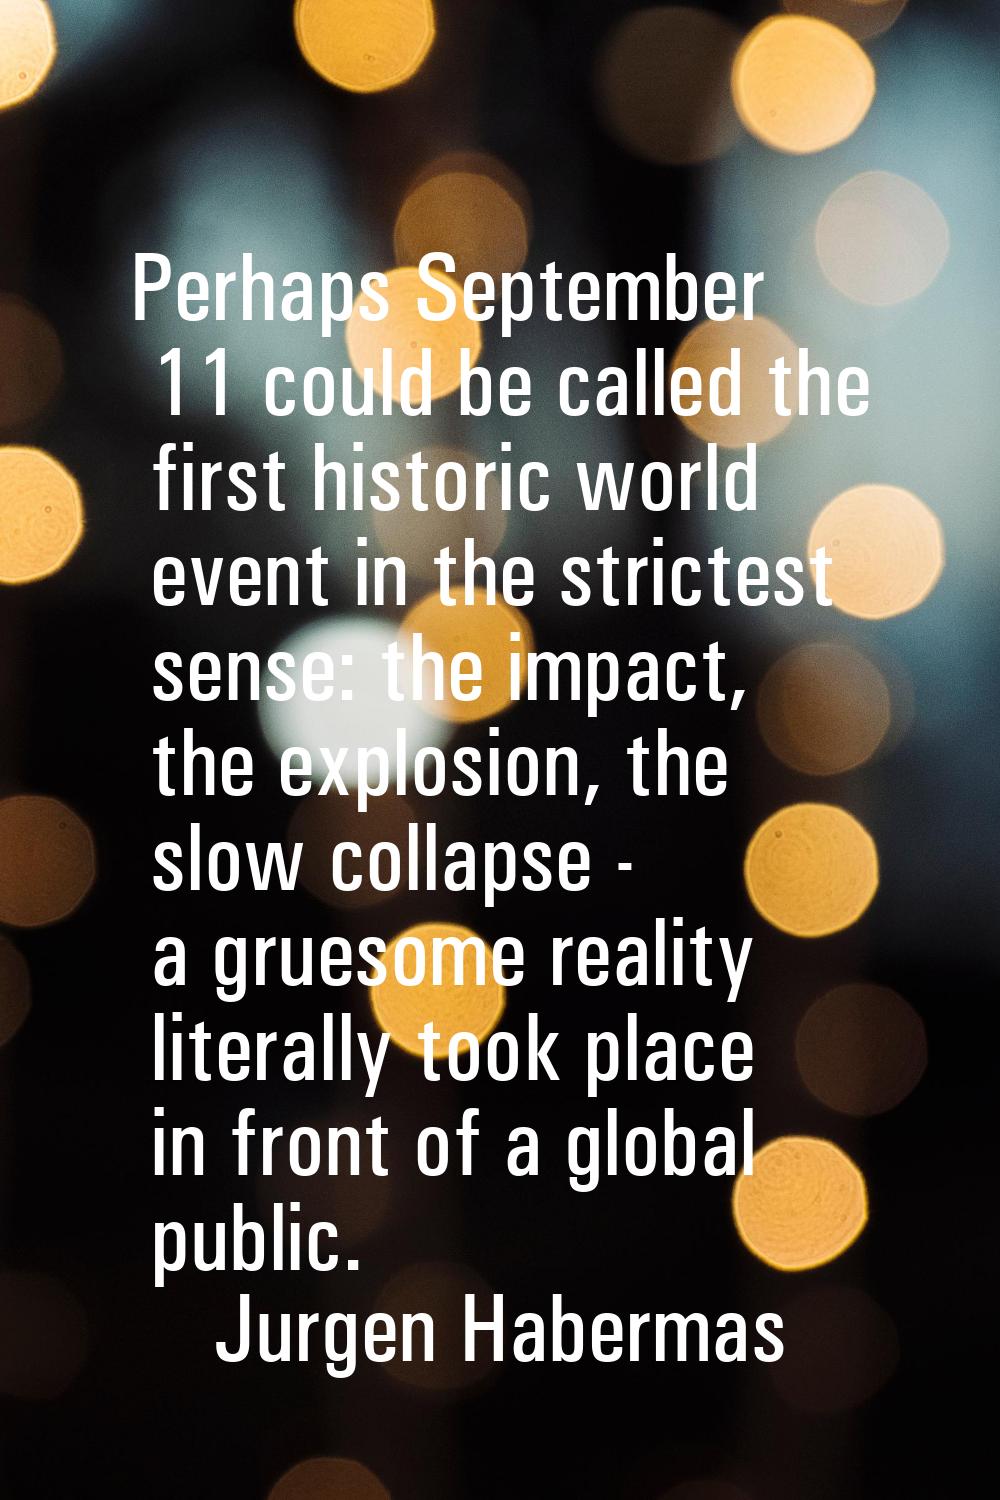 Perhaps September 11 could be called the first historic world event in the strictest sense: the imp